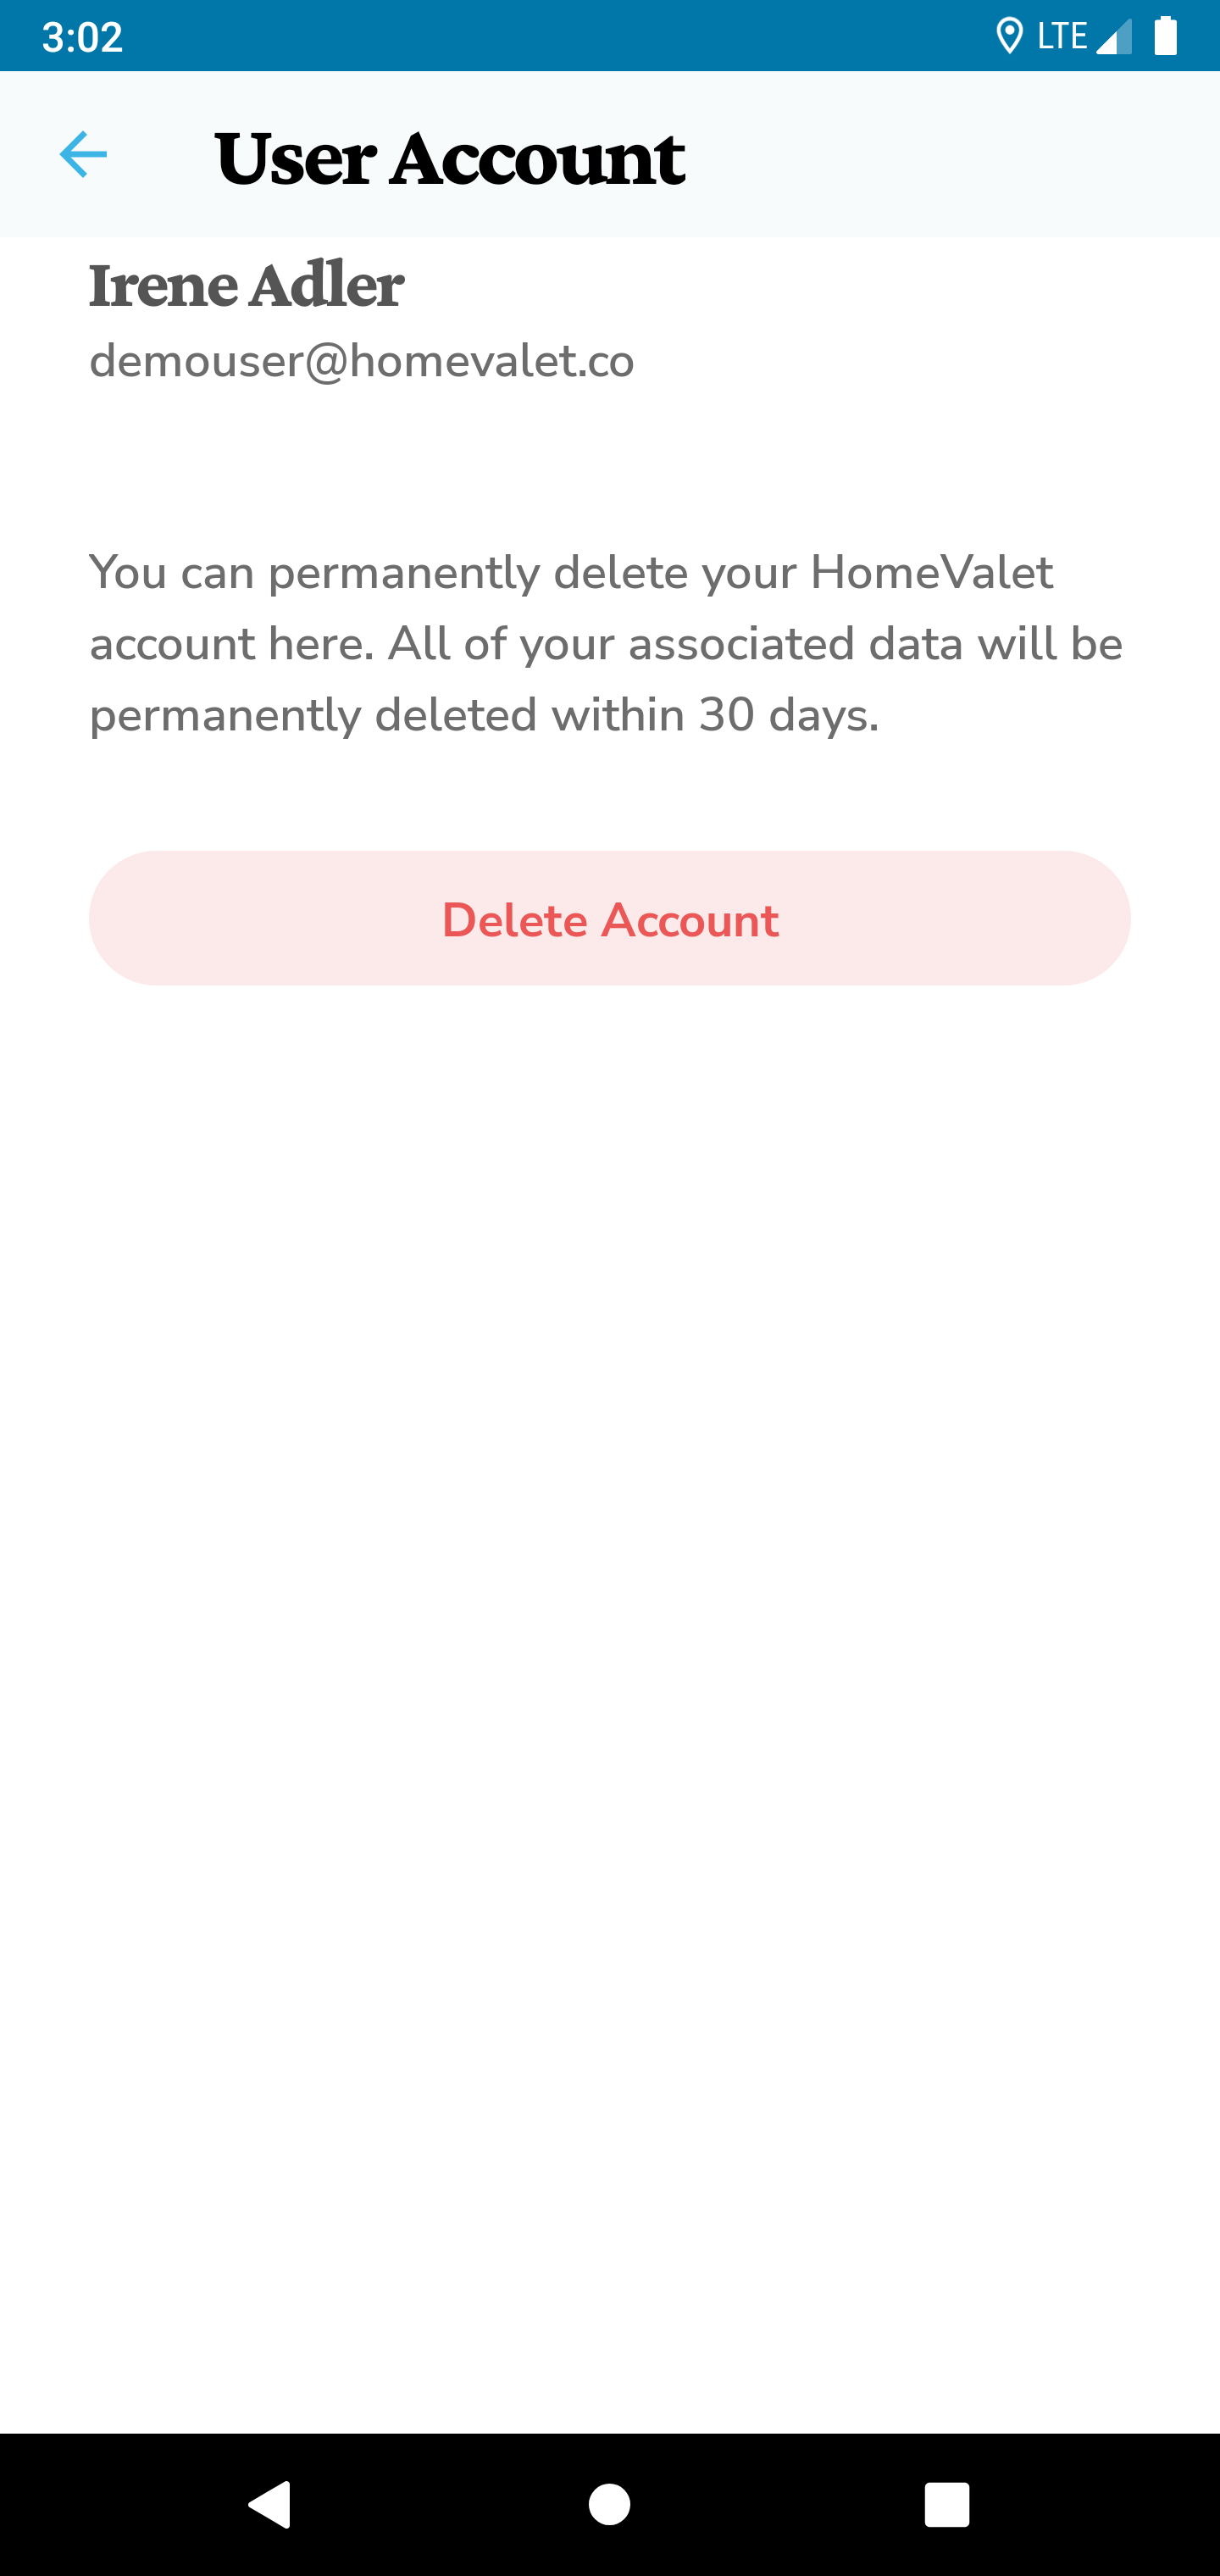 user account screen with delete account button